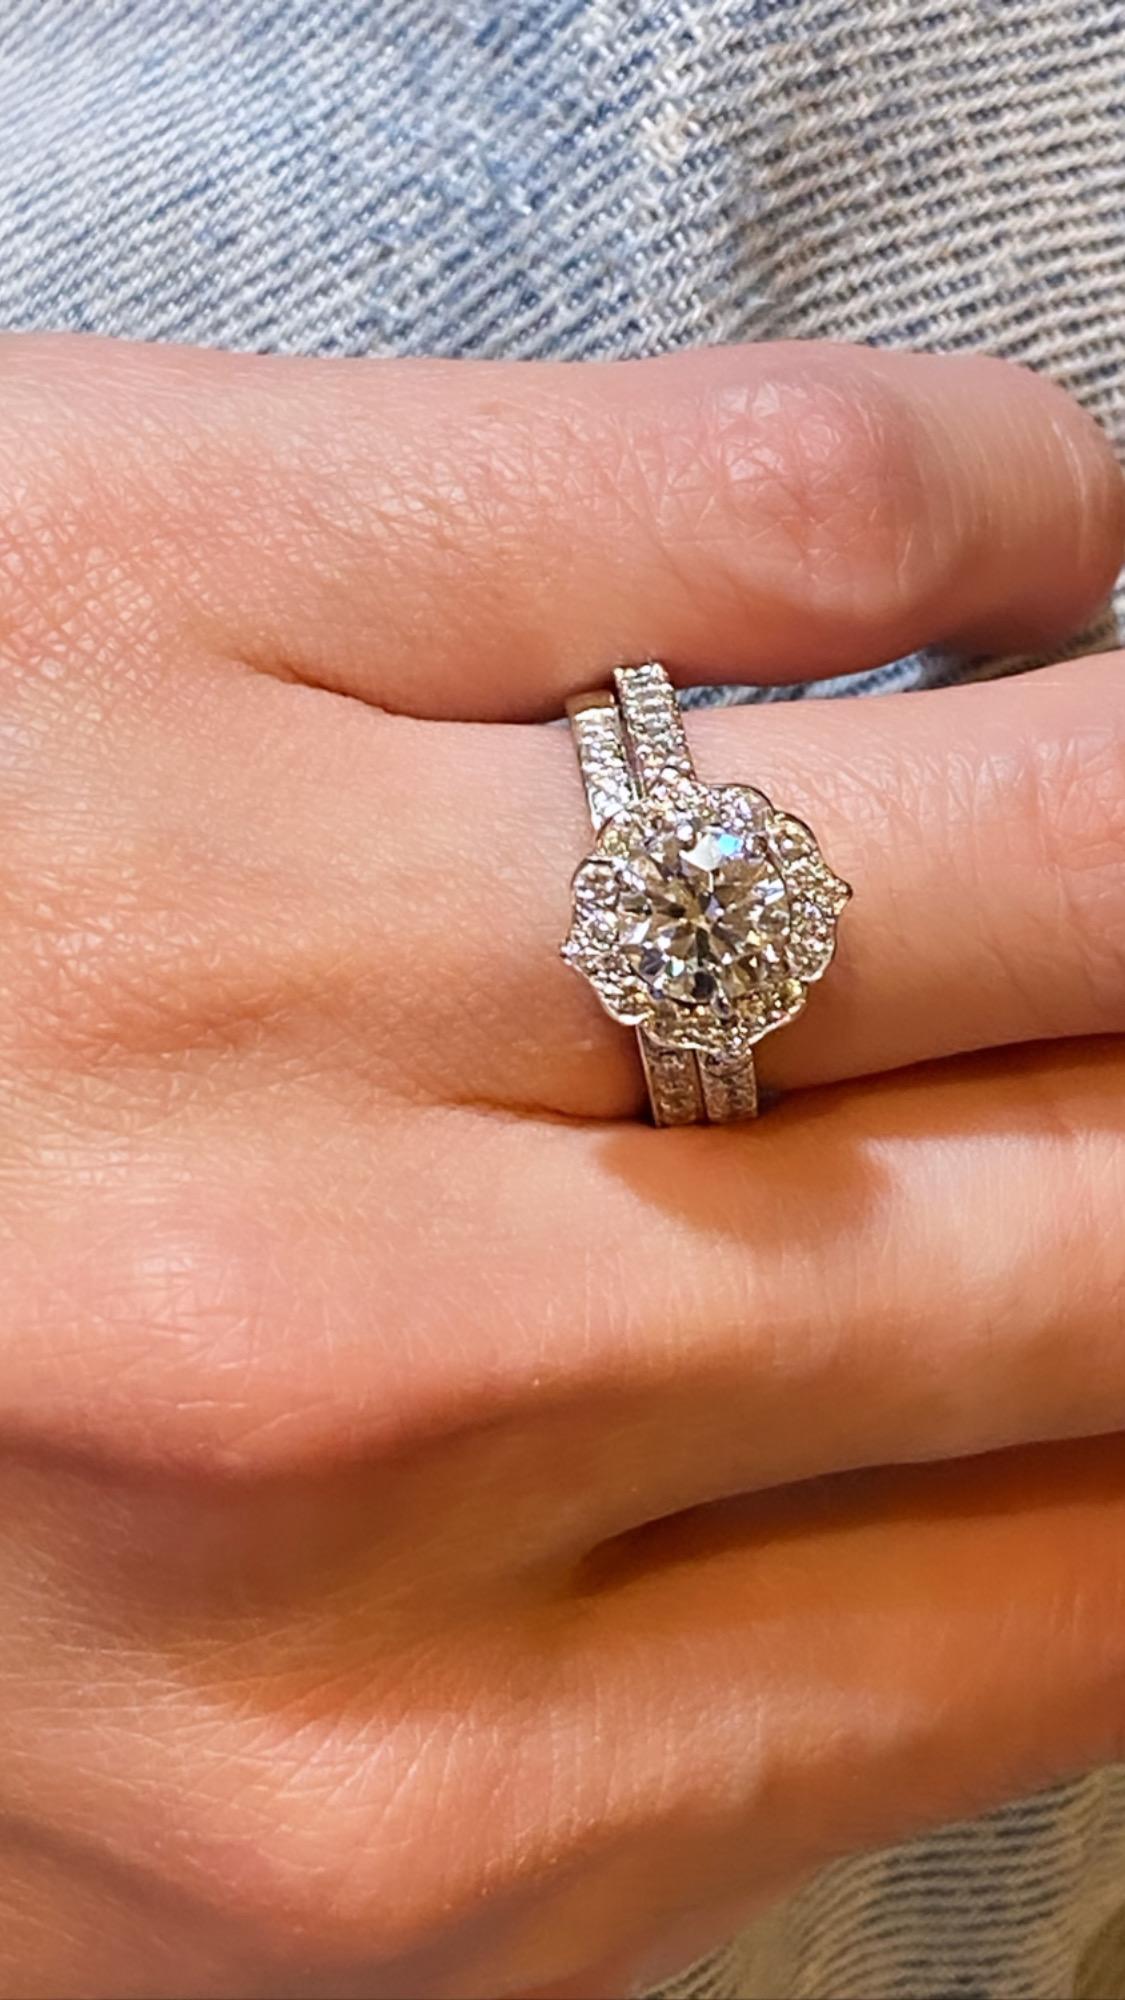 Look no further... dazzling & eye-catching, 
this set is virtually ideal wedding set,
as it features best quality materials, 
impressive 2.15ct (tcw) natural diamonds, 
timeless design & impeccable provenance!

~~~


- The Engagement Ring 
features